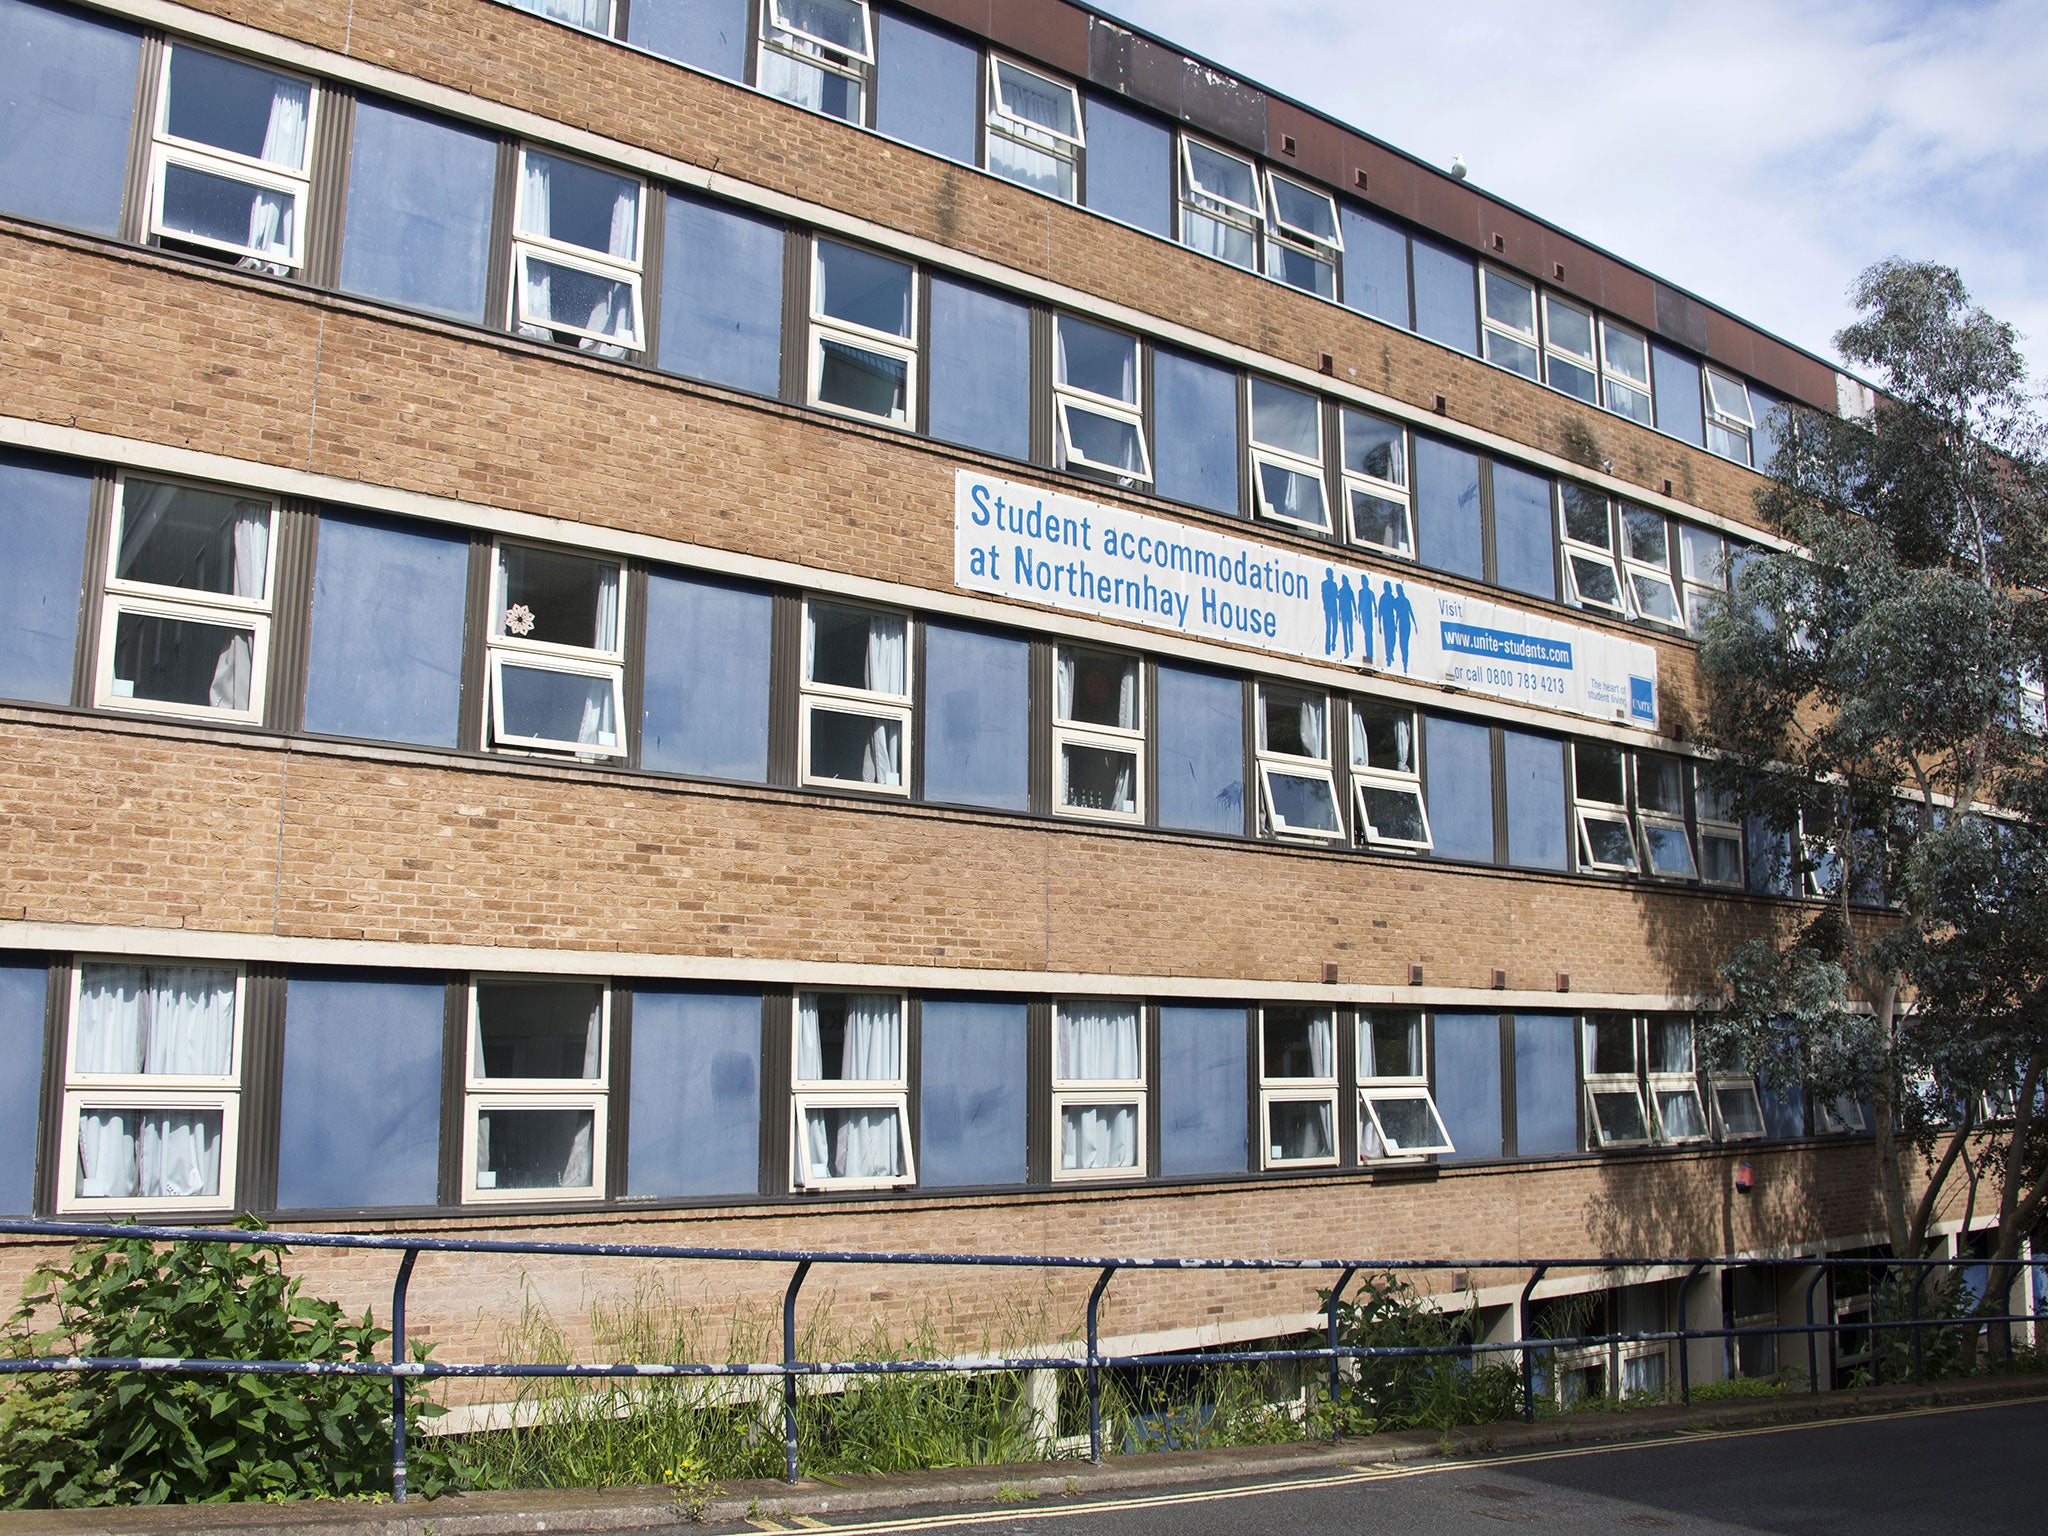 One of the many Exeter University student accommodation blocks in and around Exeter